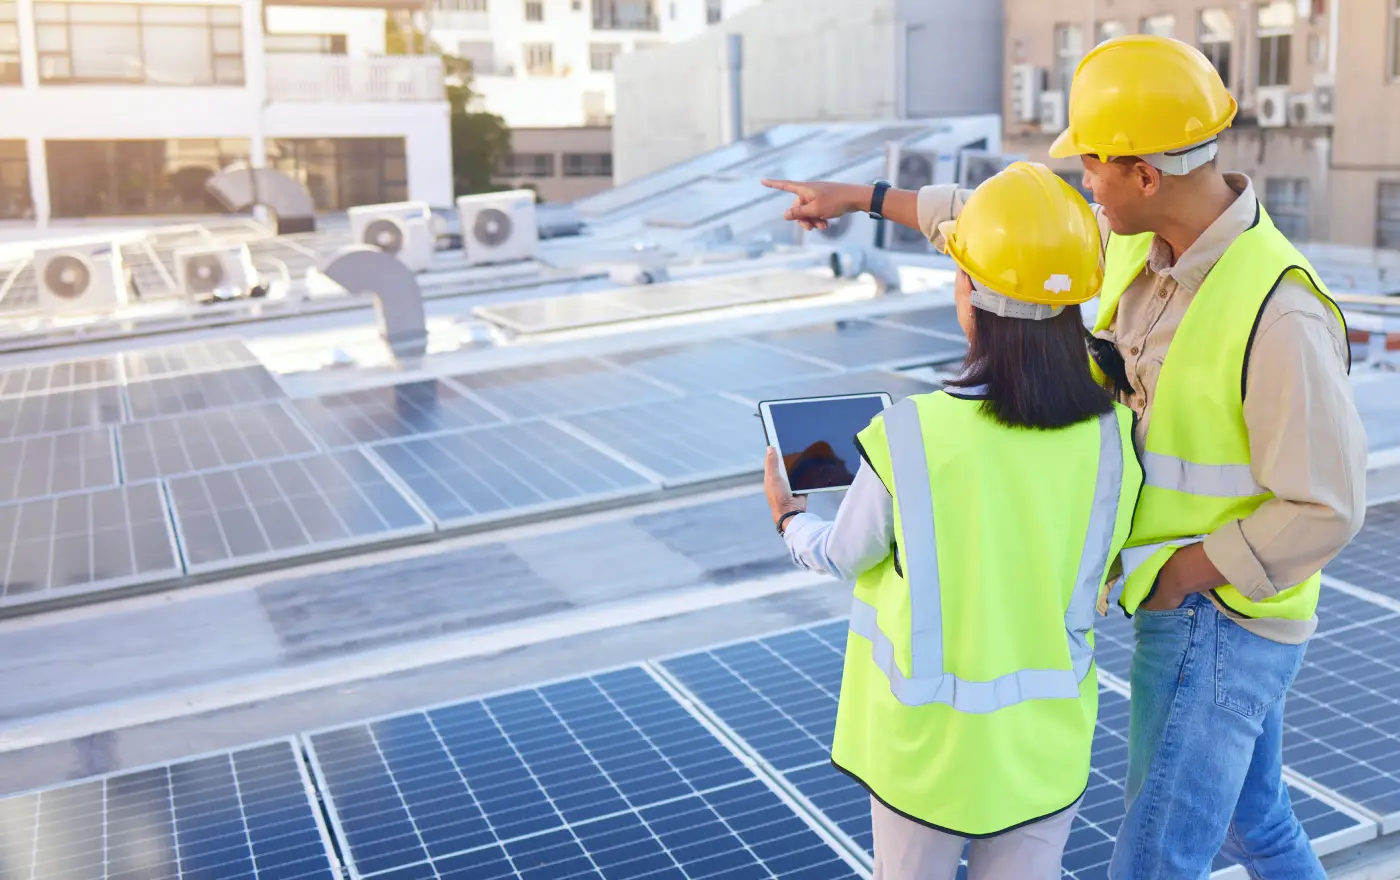 Two engineers wearing safety helmets and reflective vests inspect solar panels on a roof, one points and the other holds a tablet.